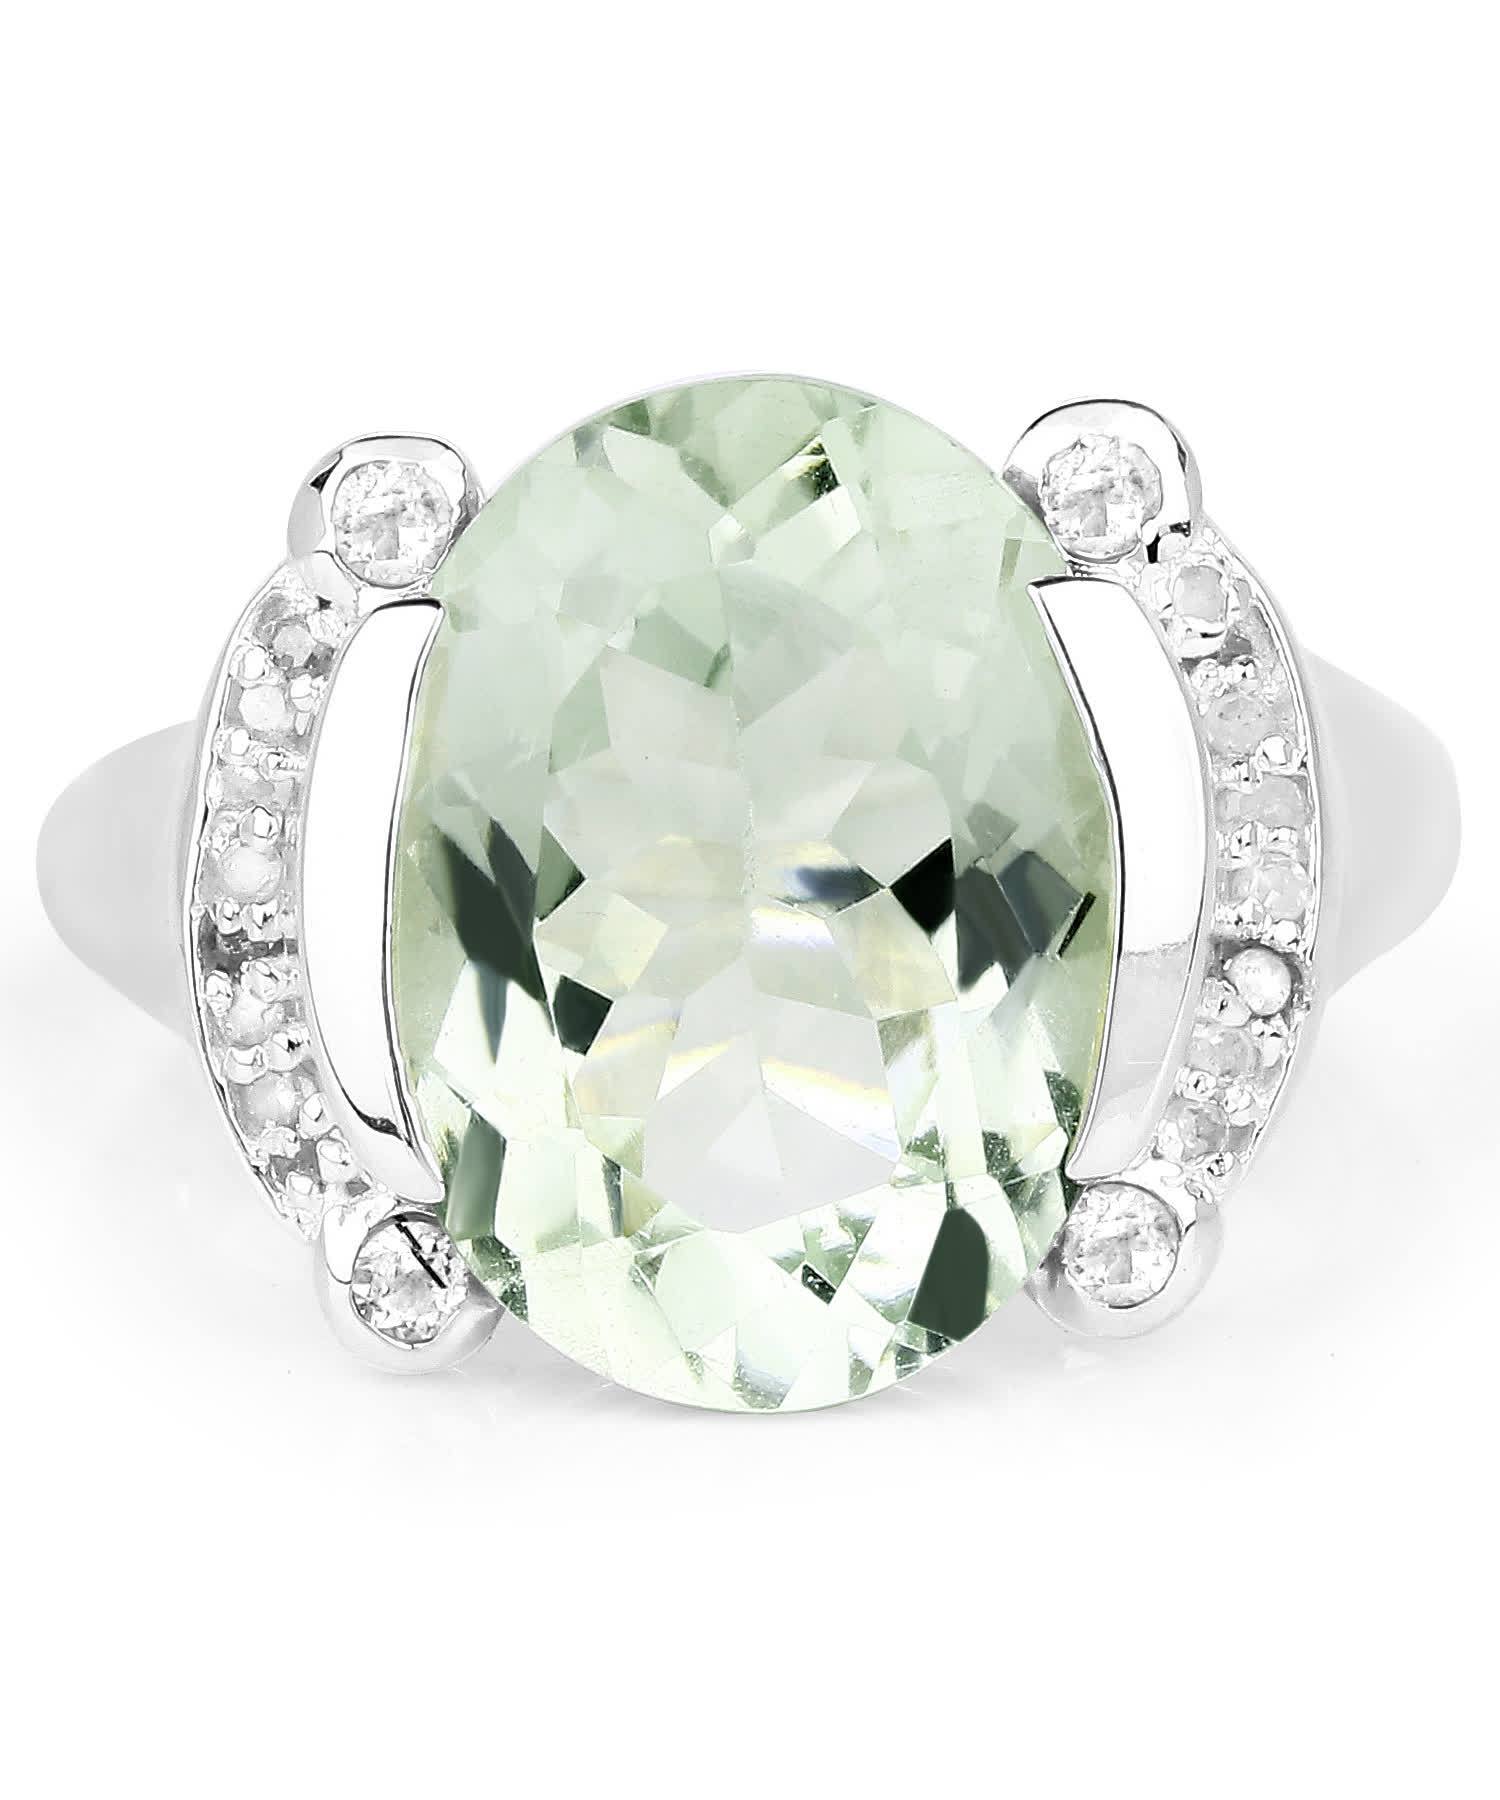 8.12ctw Natural Green Amethyst, Topaz and Diamond Rhodium Plated 925 Sterling Silver Oval Cocktail Ring View 3